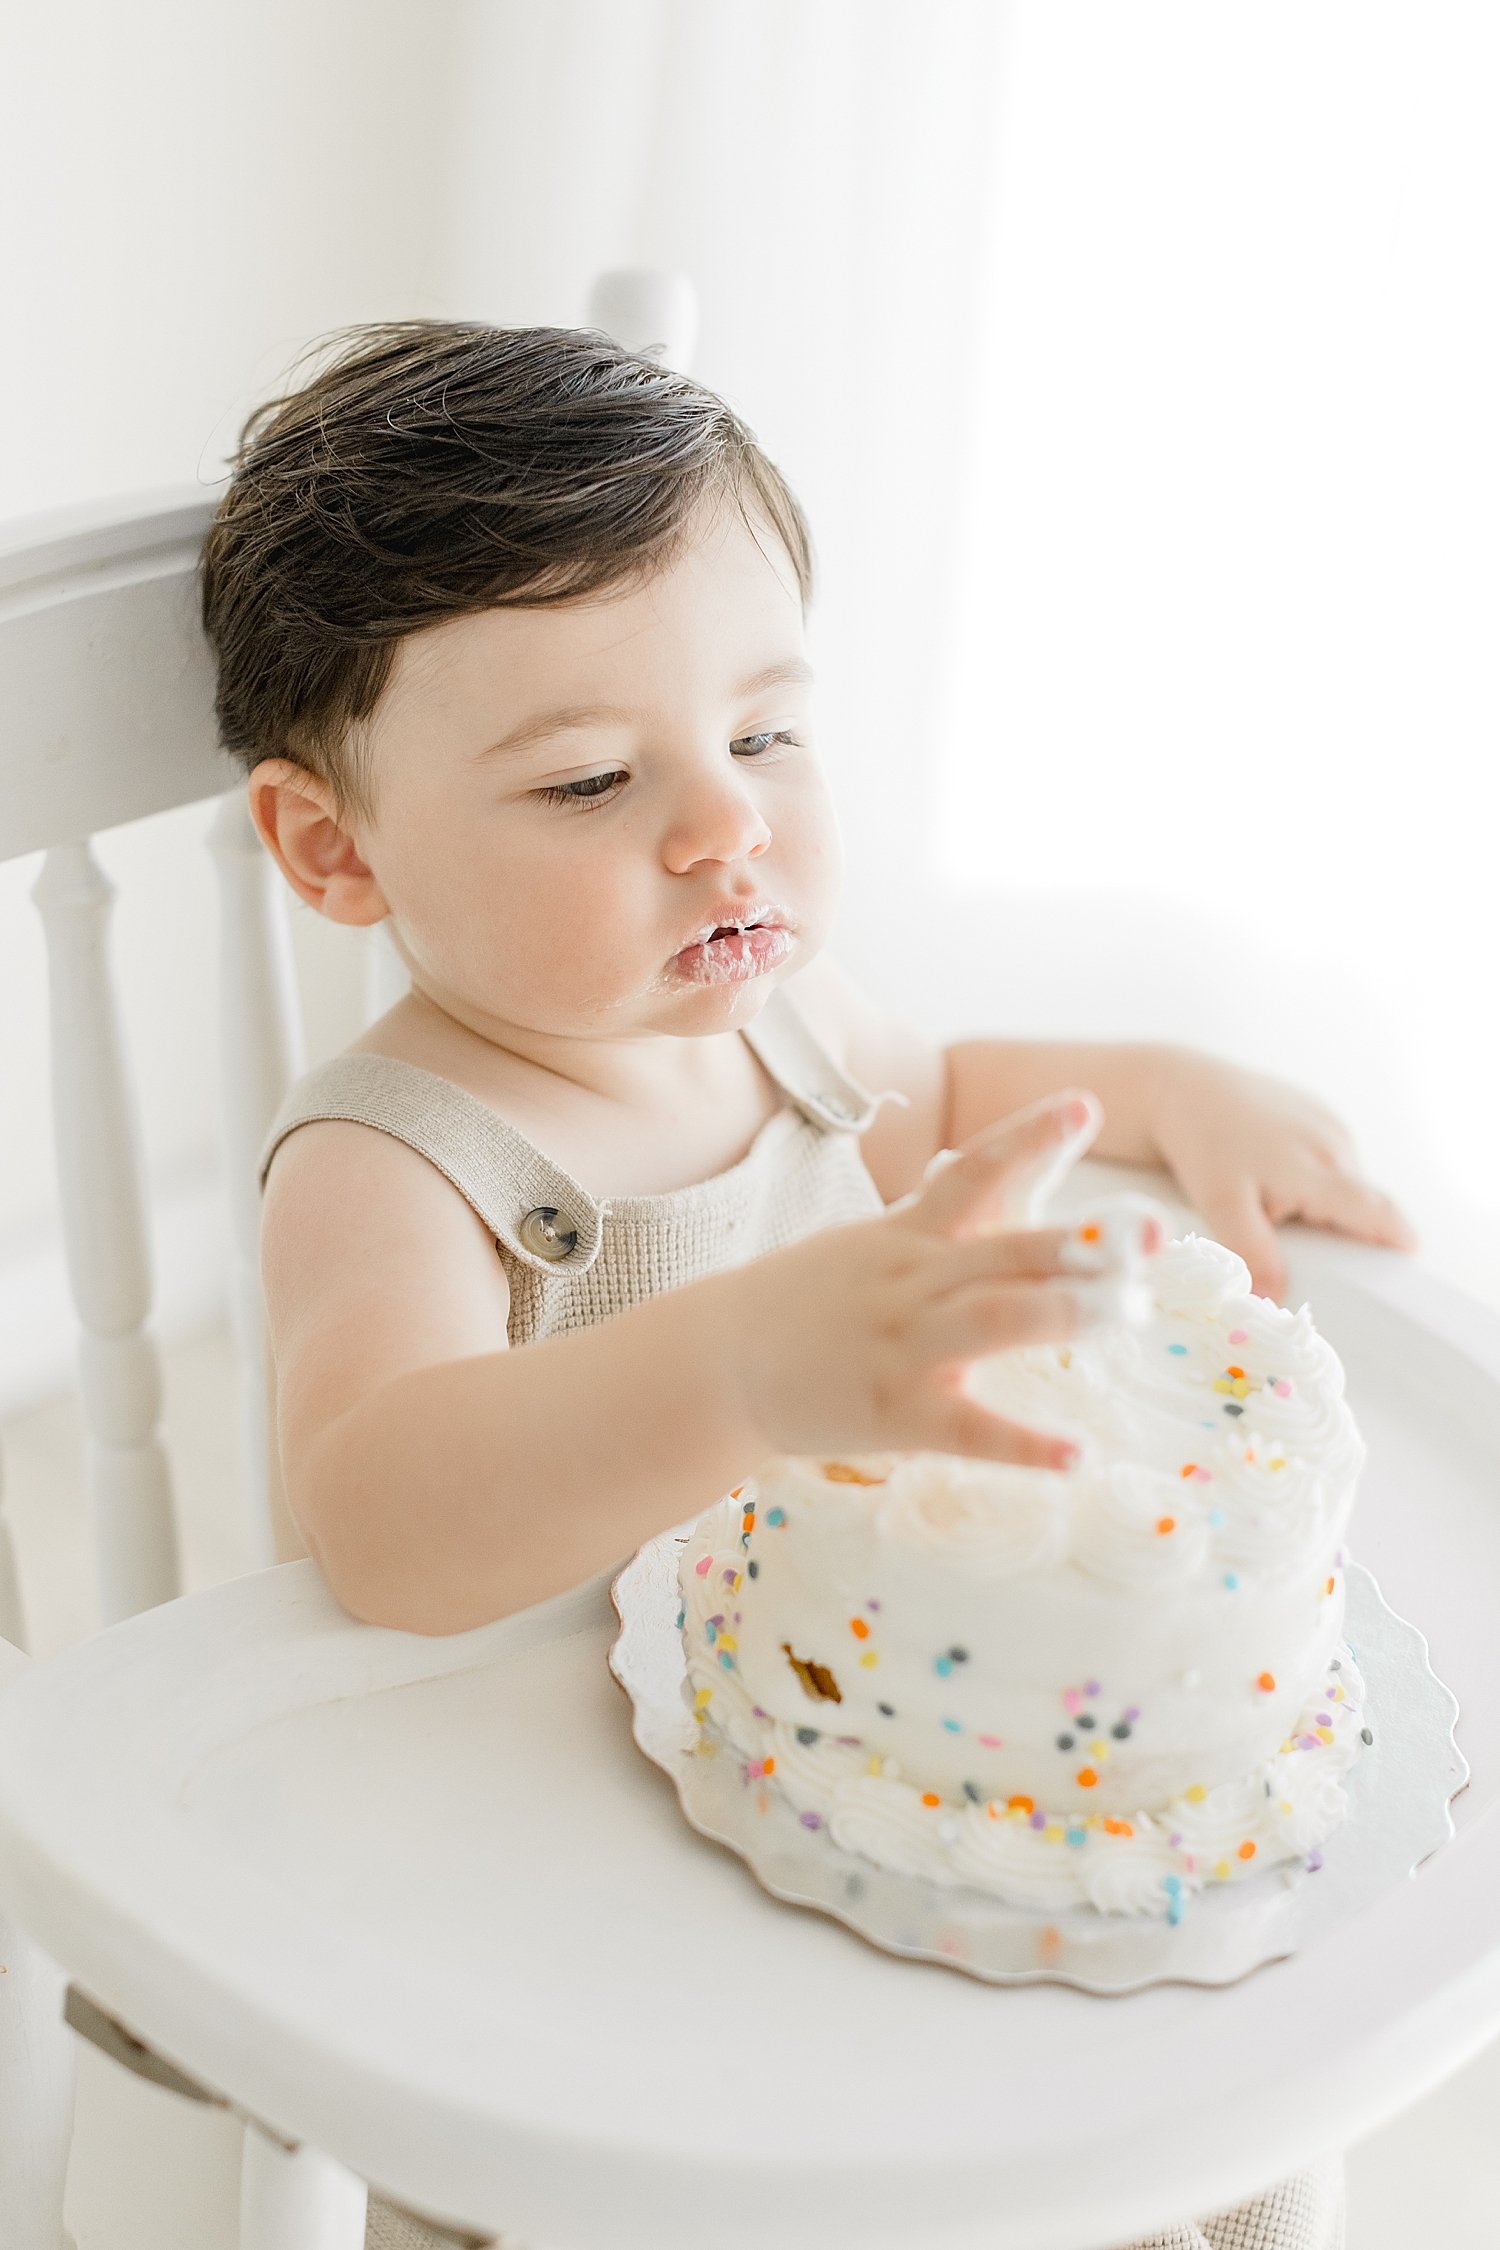 One year old cake smash session in studio | Ambre Williams Photography